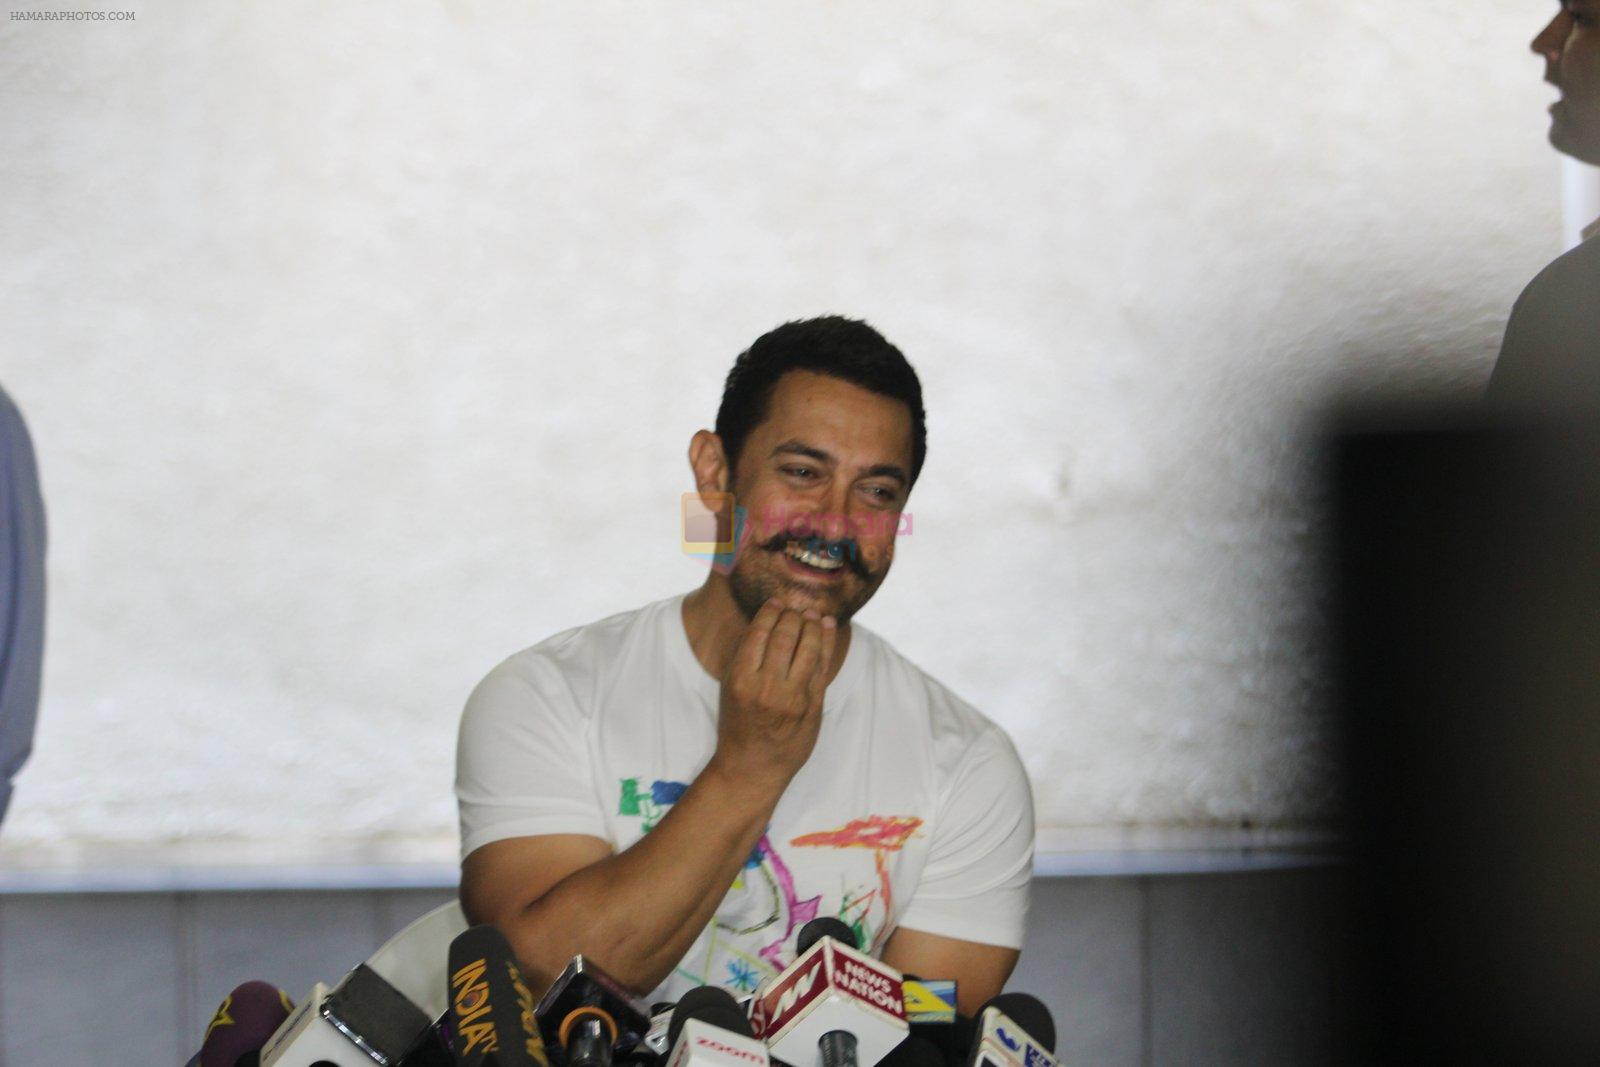 Aamir Khan celebrated his birthday with media on 14th March 2016